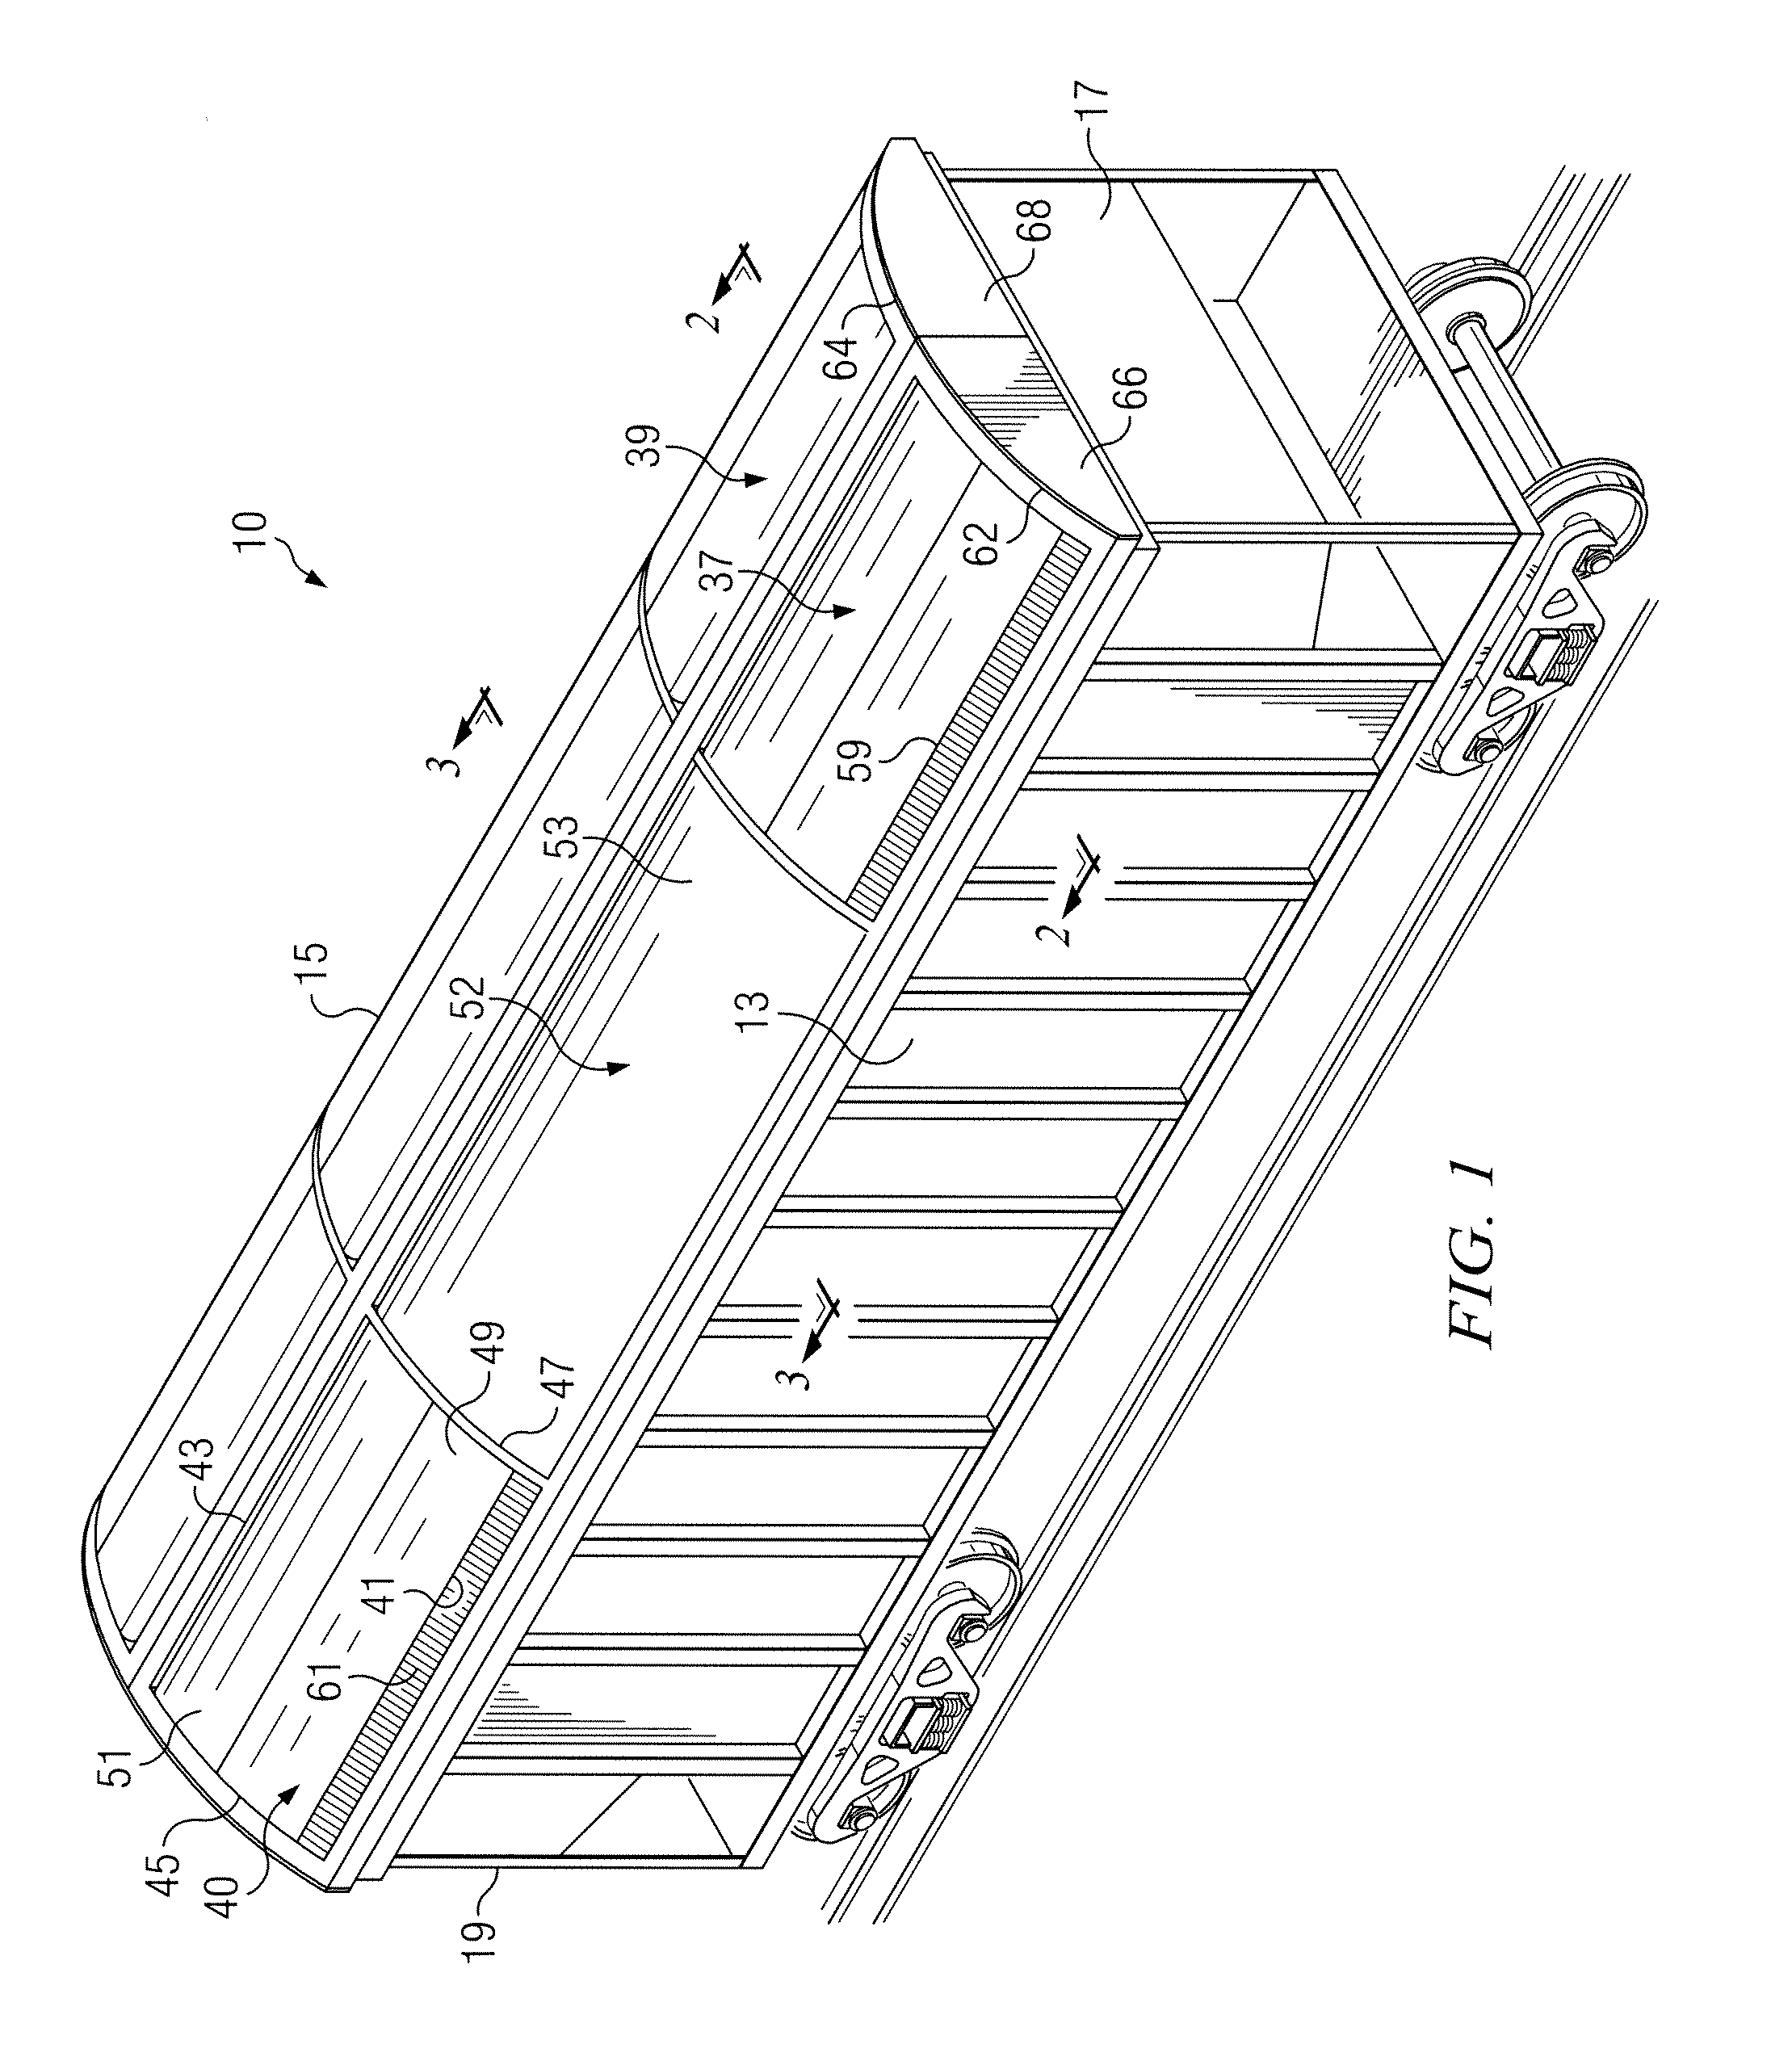 Cover System for Open Top Rail Cars